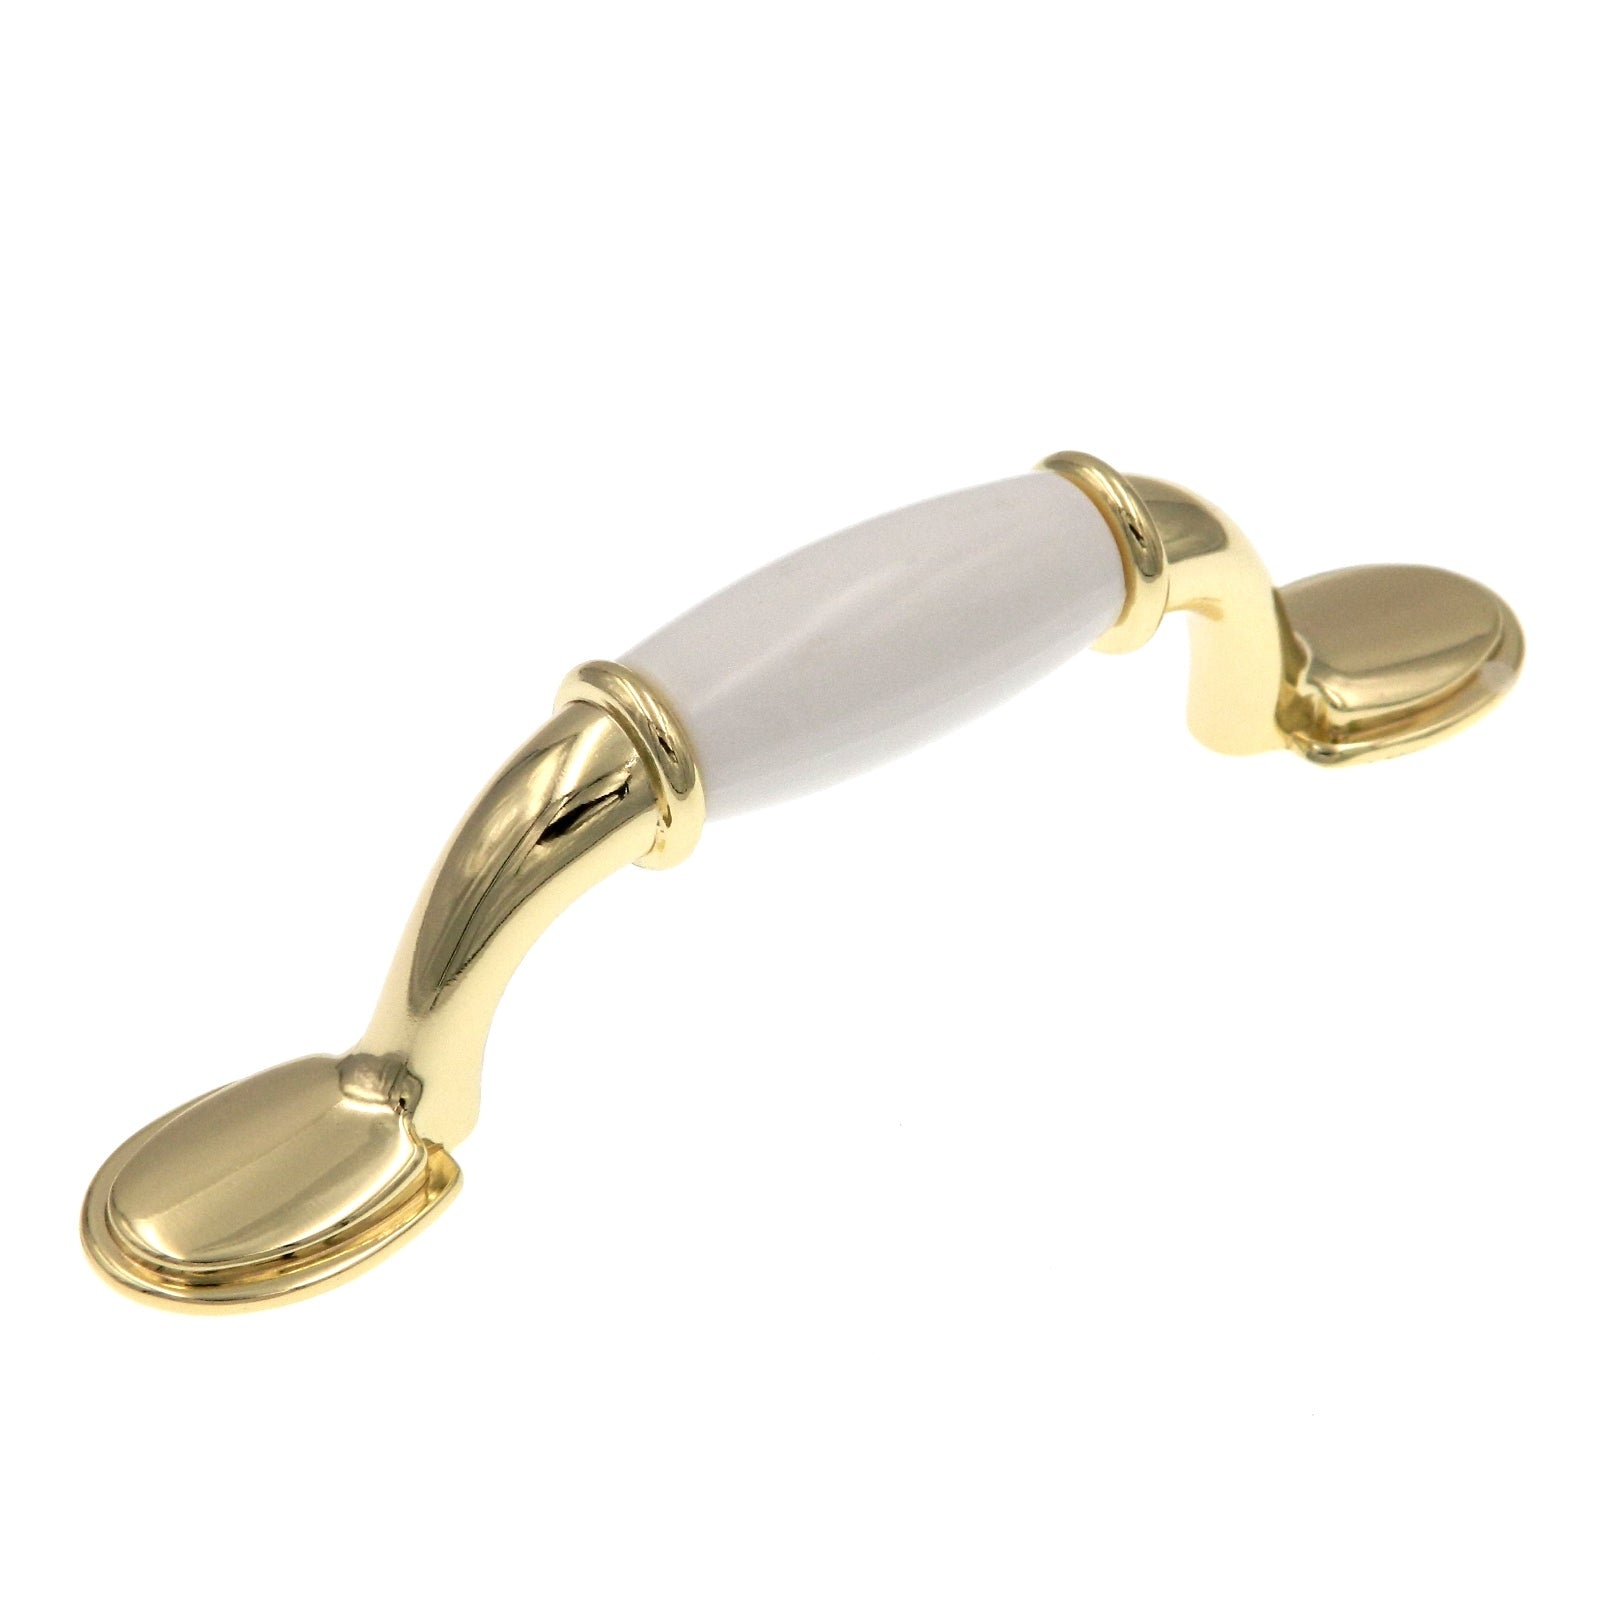 Amerock Allison Polished Brass with White Ceramic Center 3"cc Handle Pull 245WPB